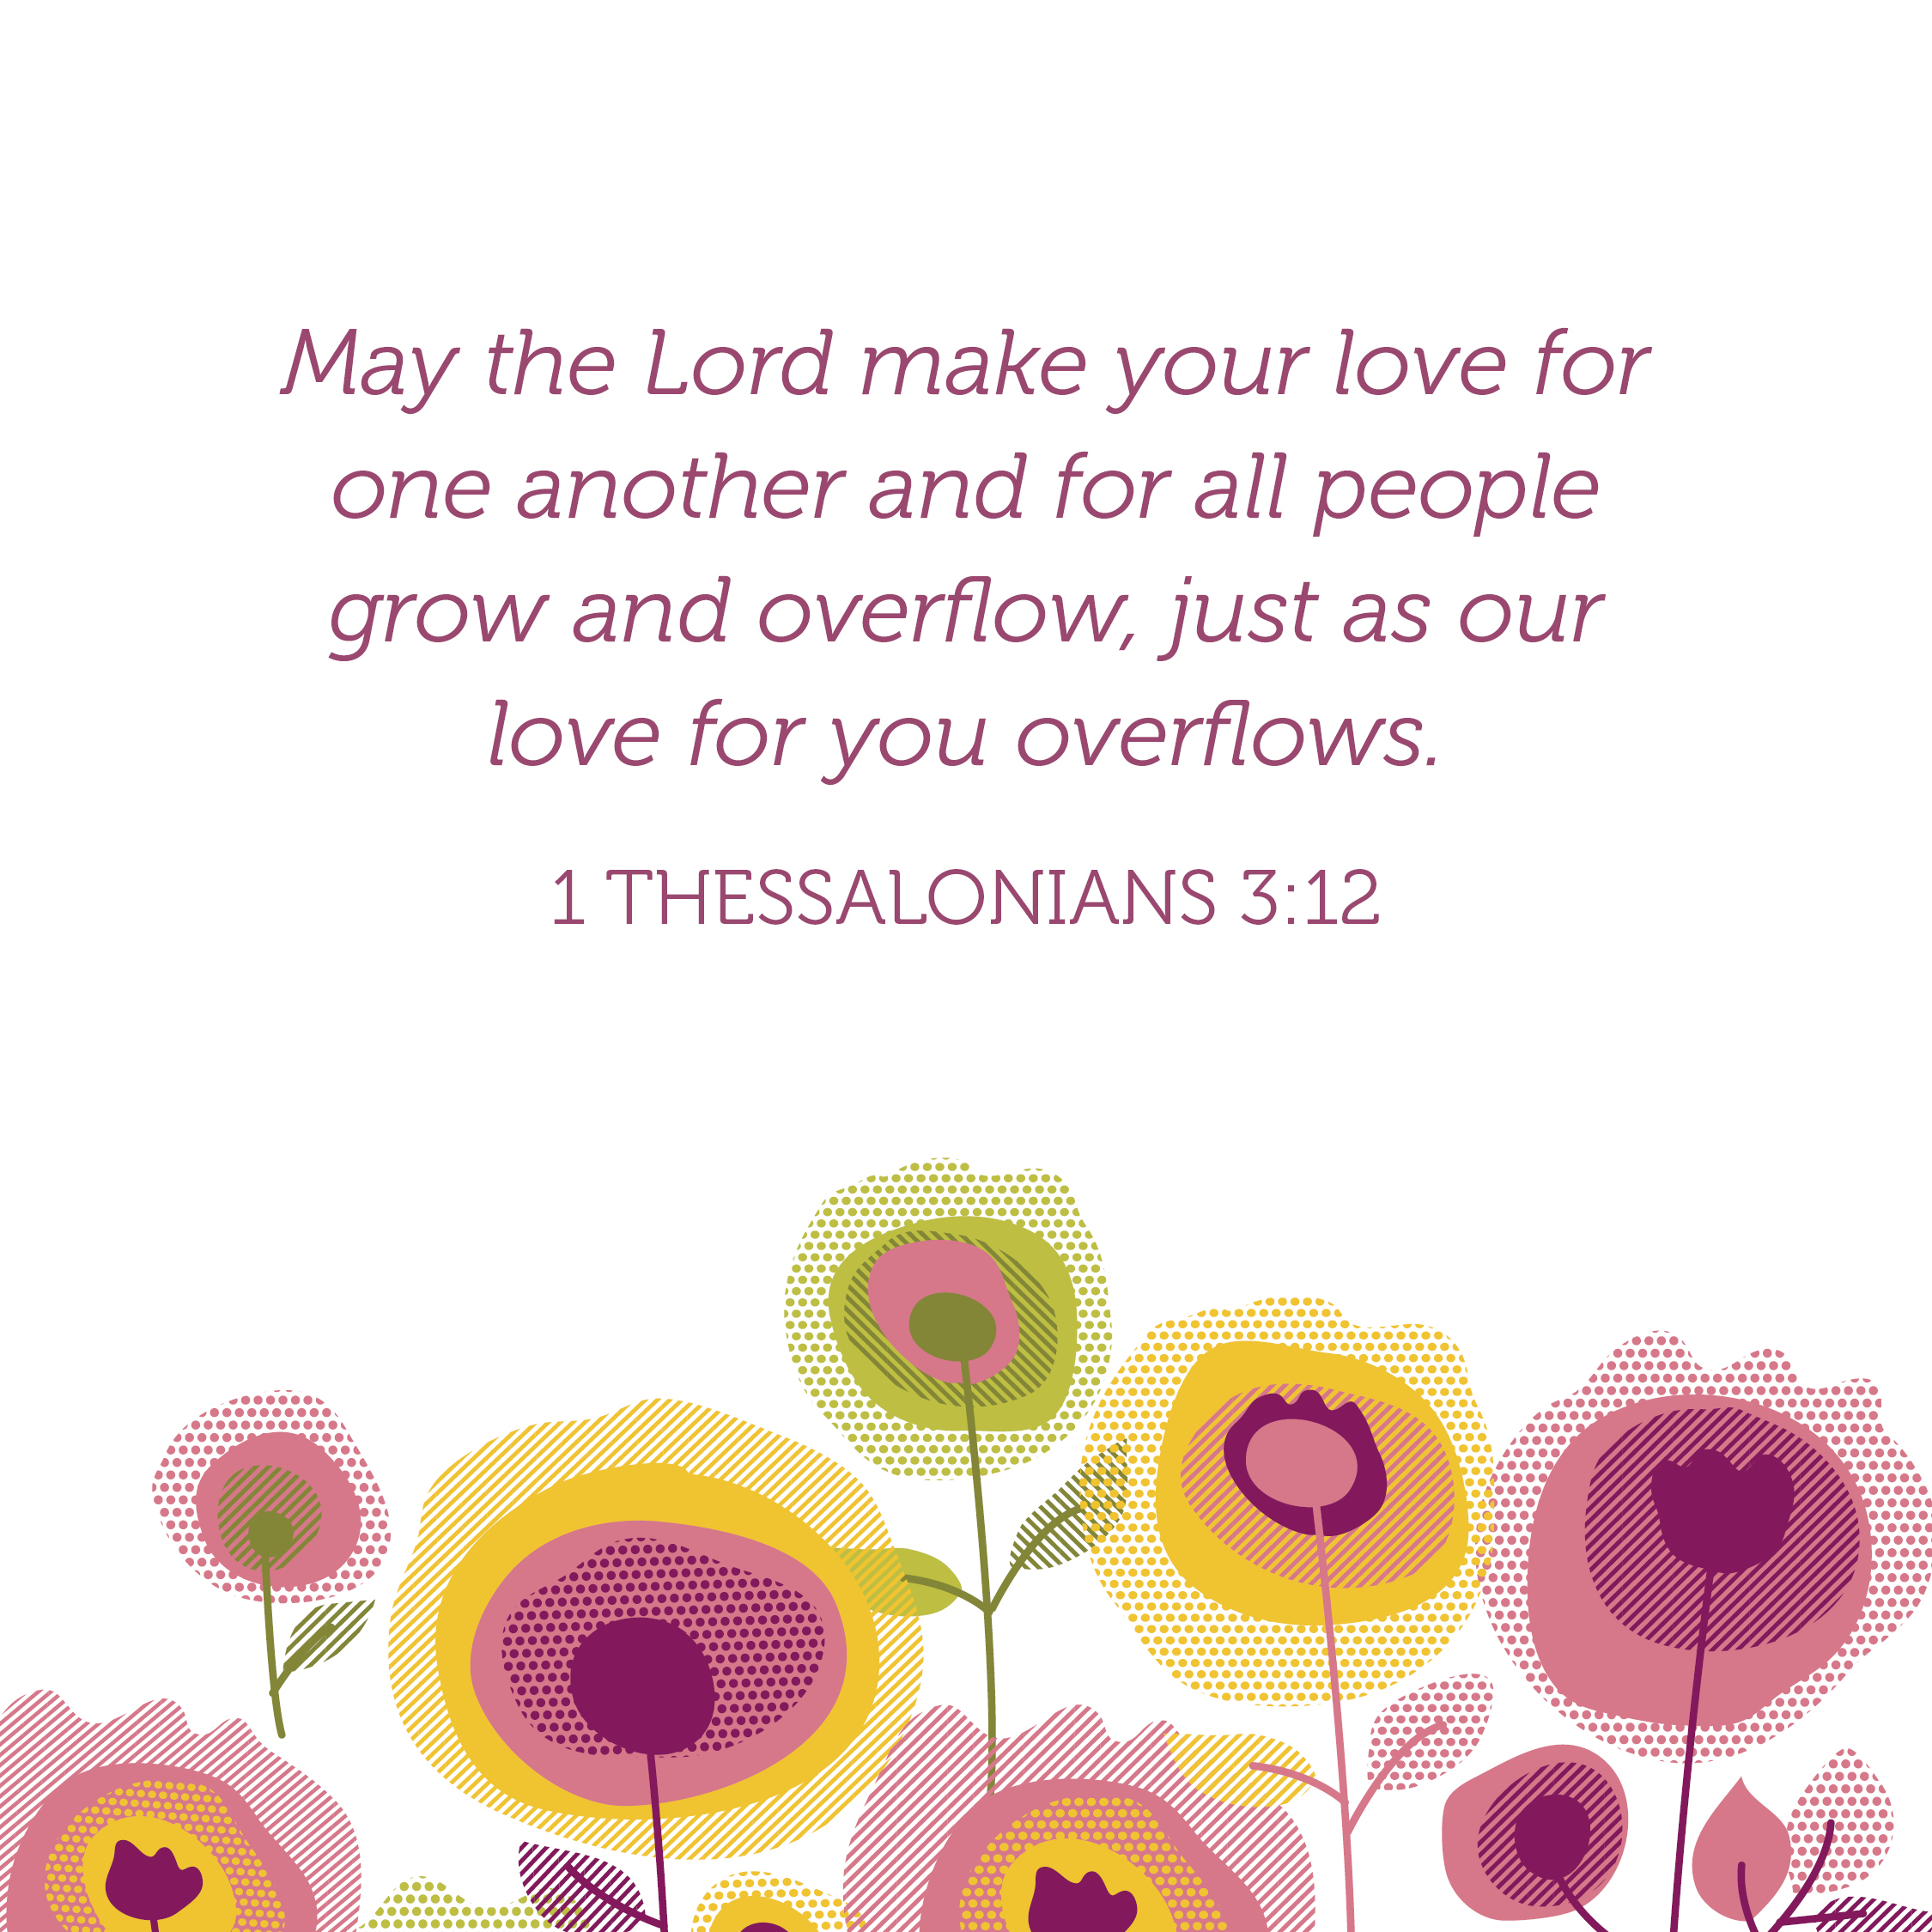 May the Lord make your love for one another and for all people grow and overflow, just as our love for you overflows.